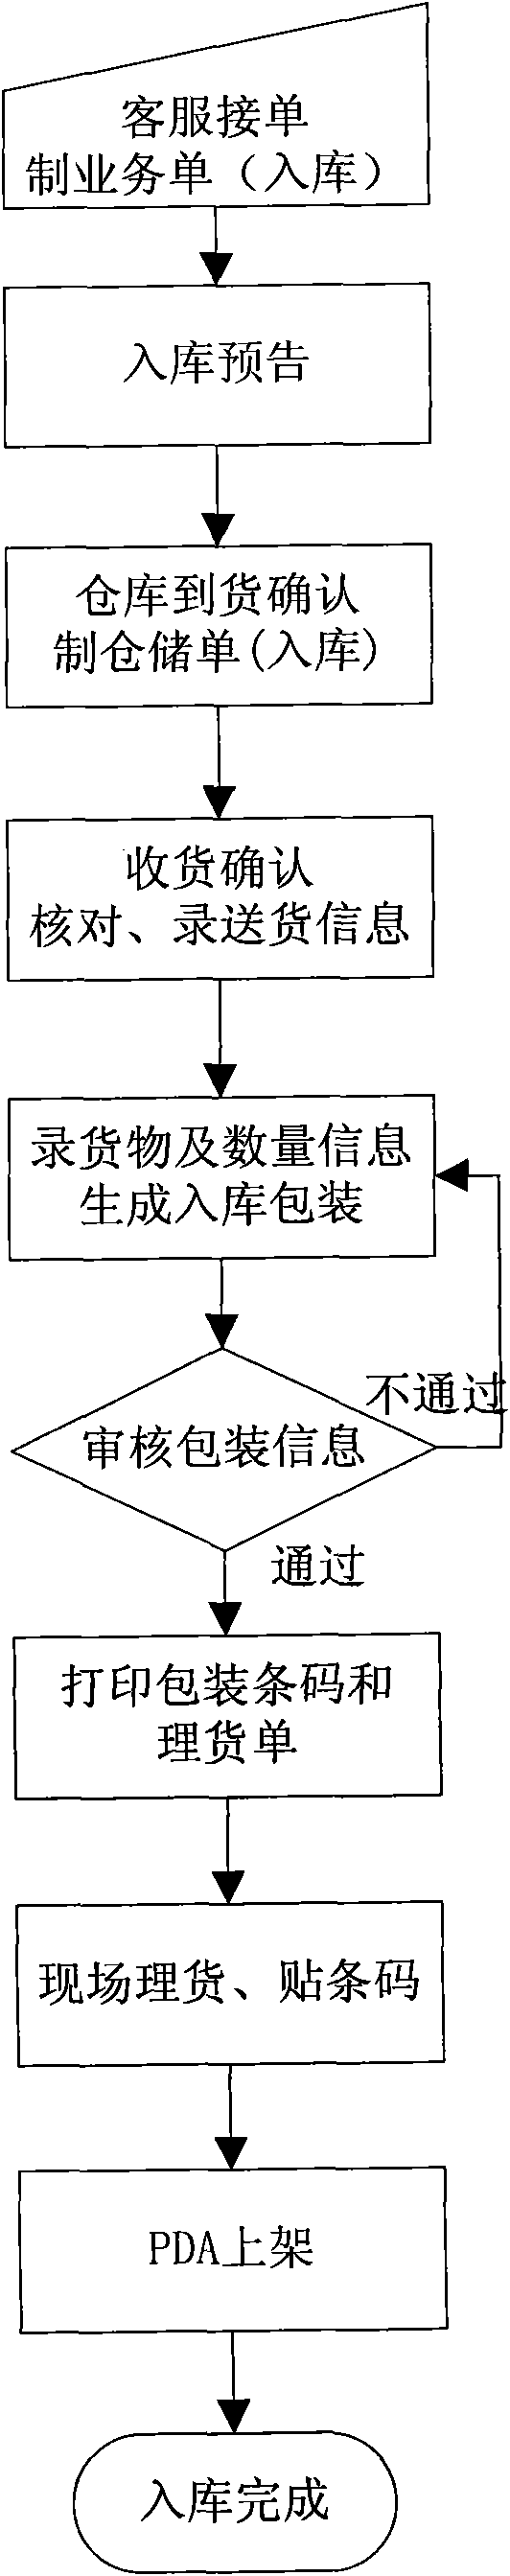 System for managing warehousing services on wireless mobile basis